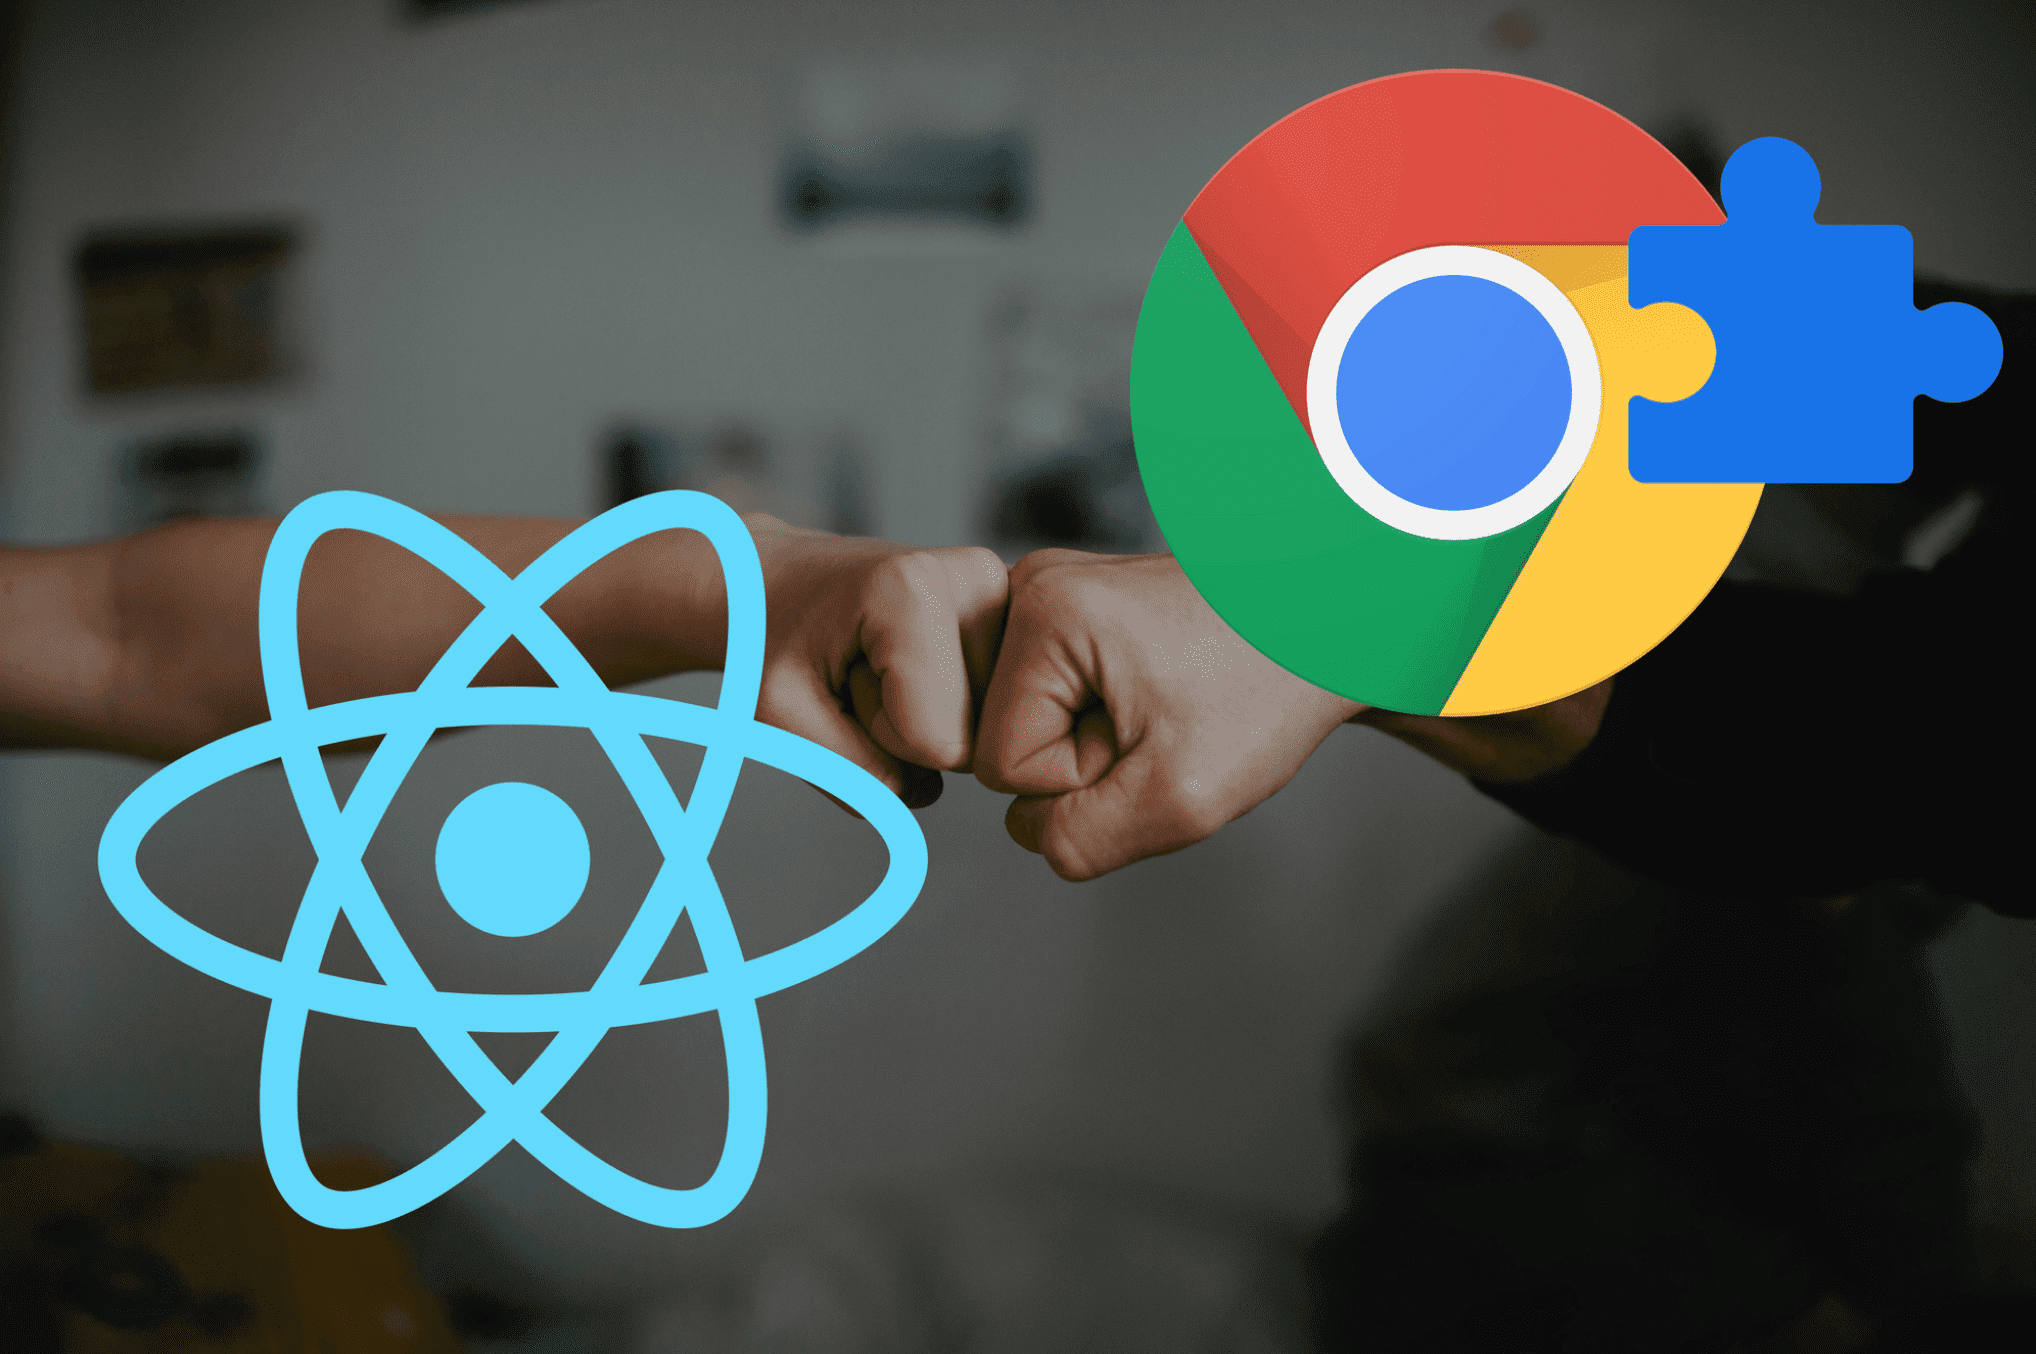 Handshake with fists - Left shows React logo, right side shows Chrome extension Logo